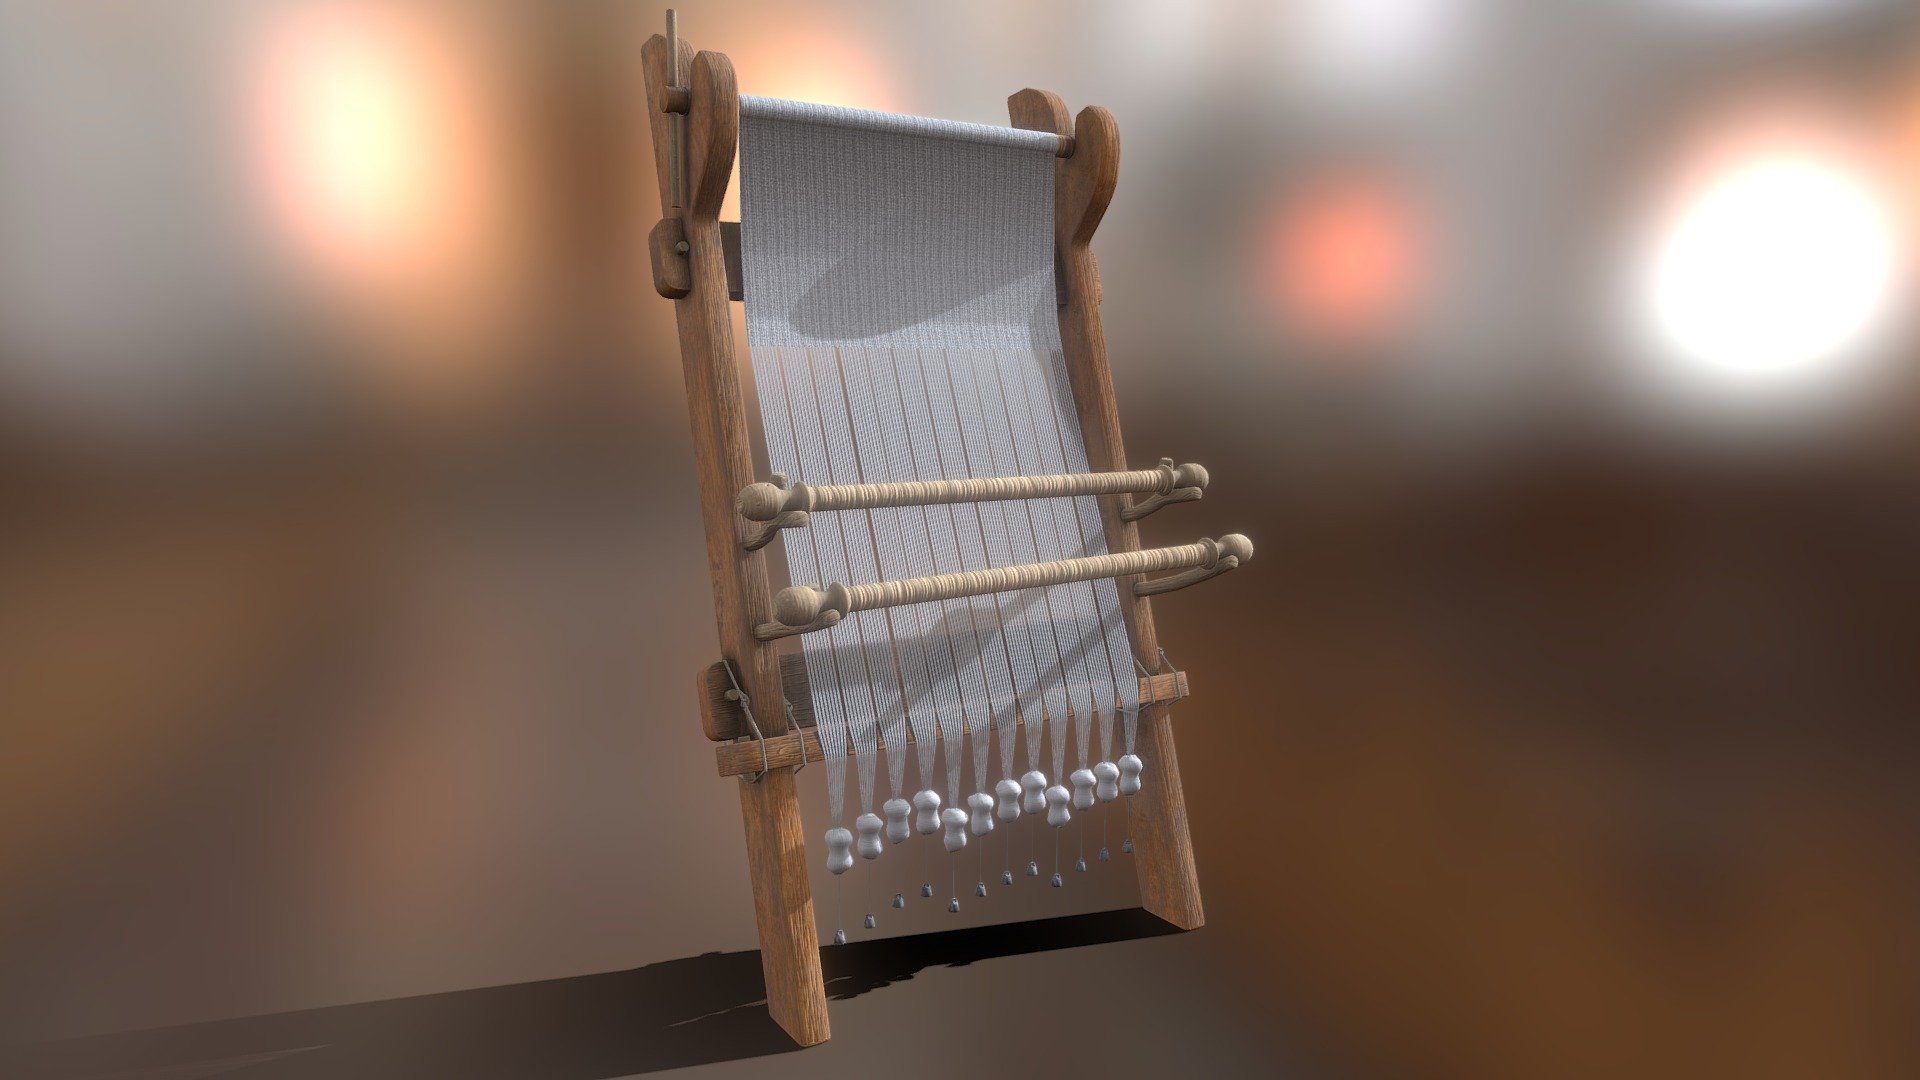 A warp-weighted loom is a vertical frame loom where the warp yarns are suspended and stretched by loom weights. The width of the frame defines the width of the woven fabric, which is wound on the top horizontal beam.
Around 1000, this weaving typically took place in sunken huts (Grübenhauser) which could be heated during winter. The problem with current reconstructions is that there is very little light in such a sunken hut while weaving is a precise activity that does require sufficient light.  We have solved this somewhat by adding an open roof to make the smoke of the fire disappear but also to provide more incoming light. 
 - Weaving loom - 3D model by visualdimension 3d model